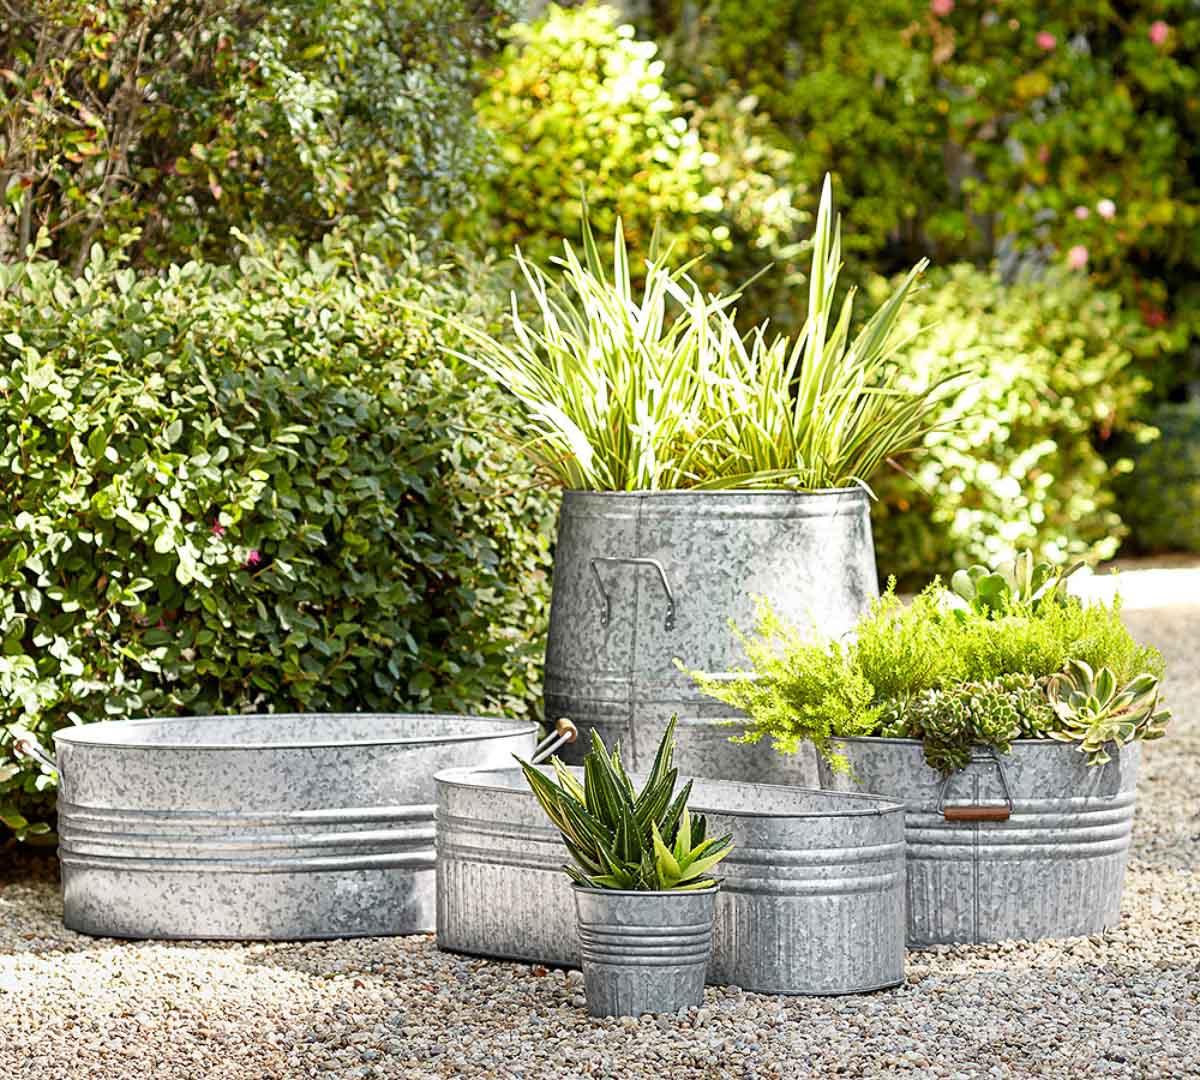 A variety of galvanized metal planters